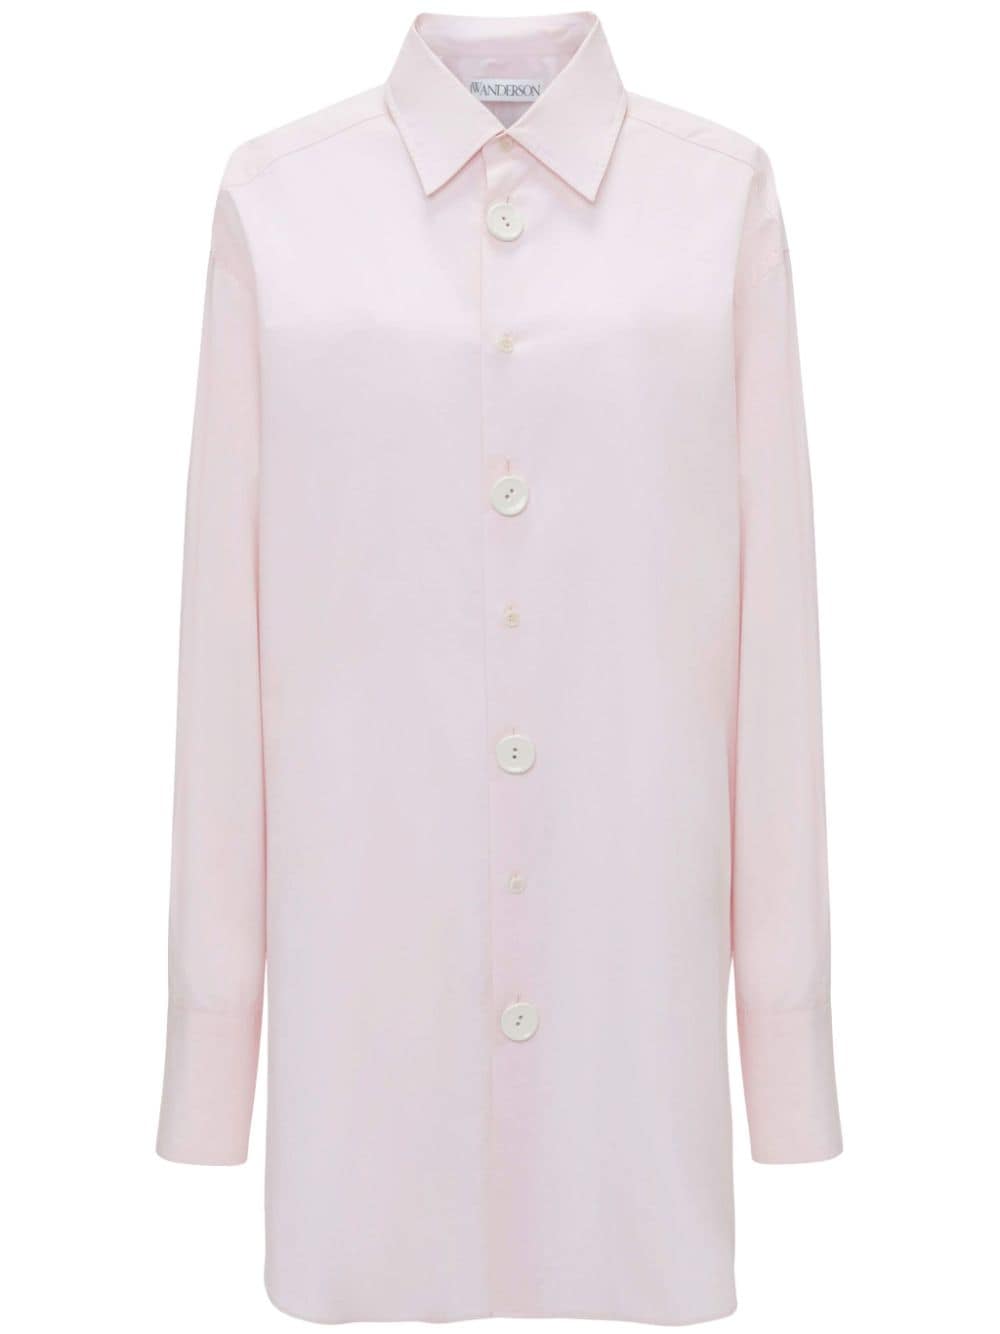 JW Anderson long-sleeve cotton shirt - Pink